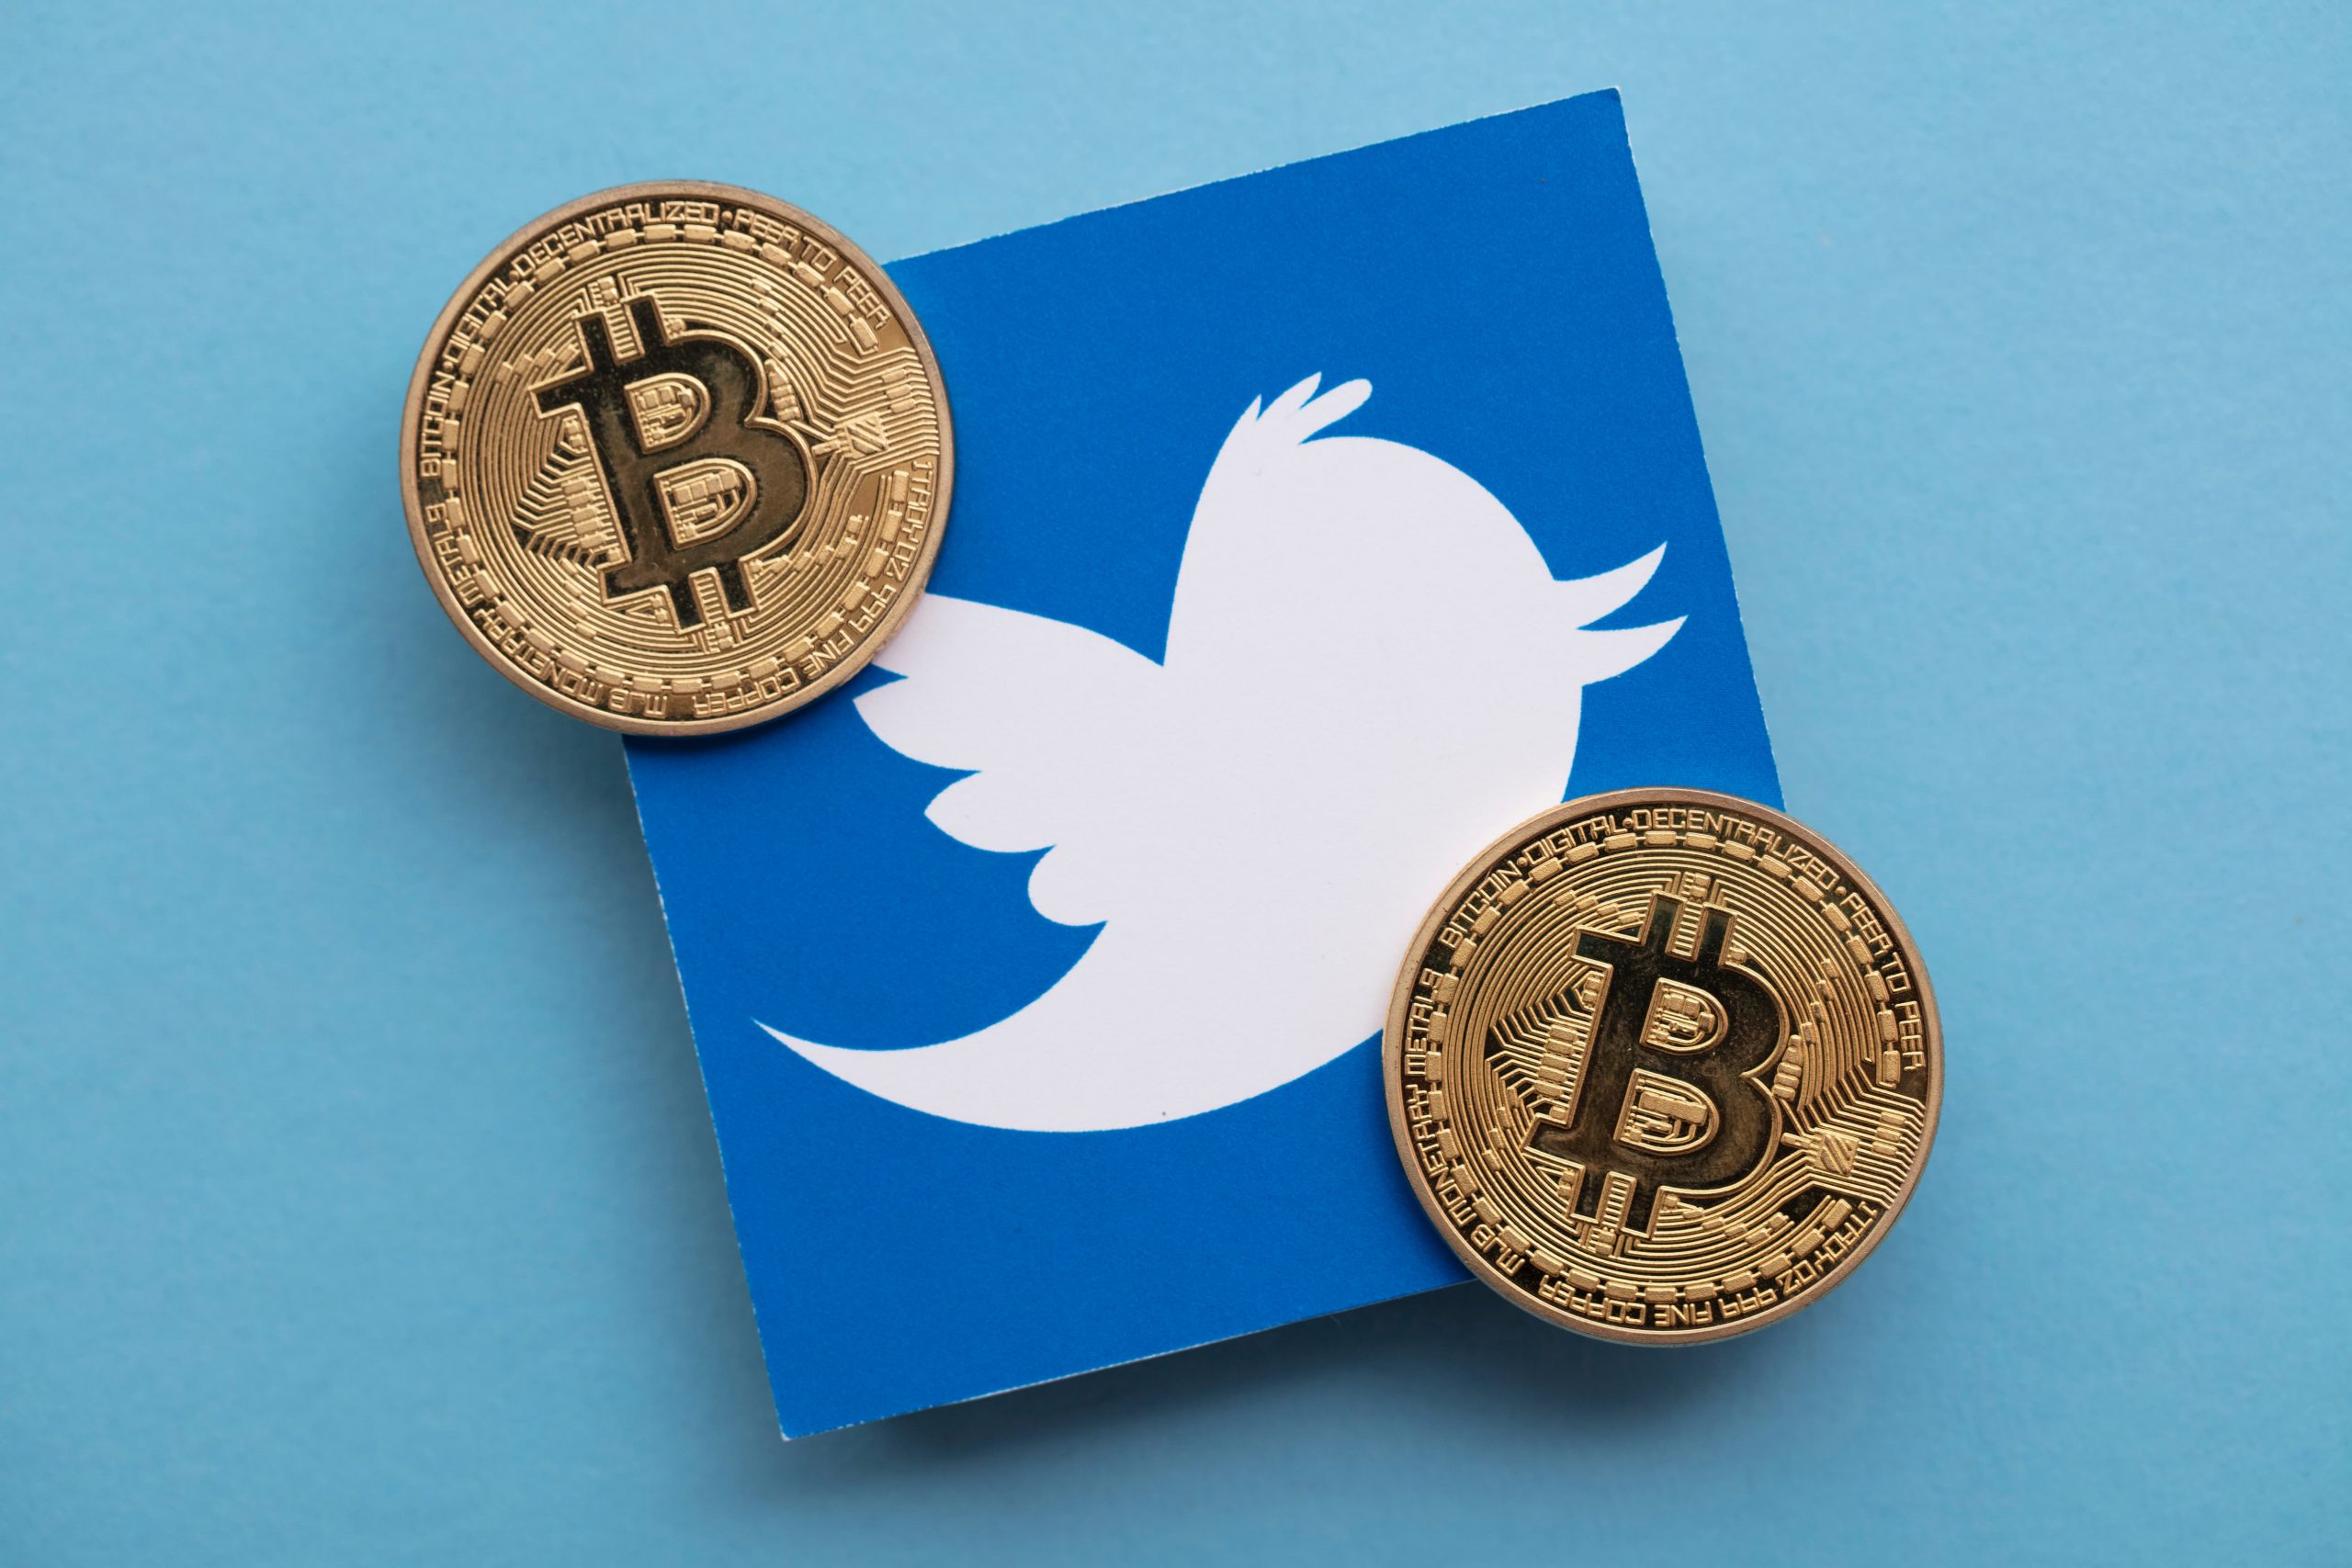 Bitcoin to be Used in Twitter Tip Jar Initiative